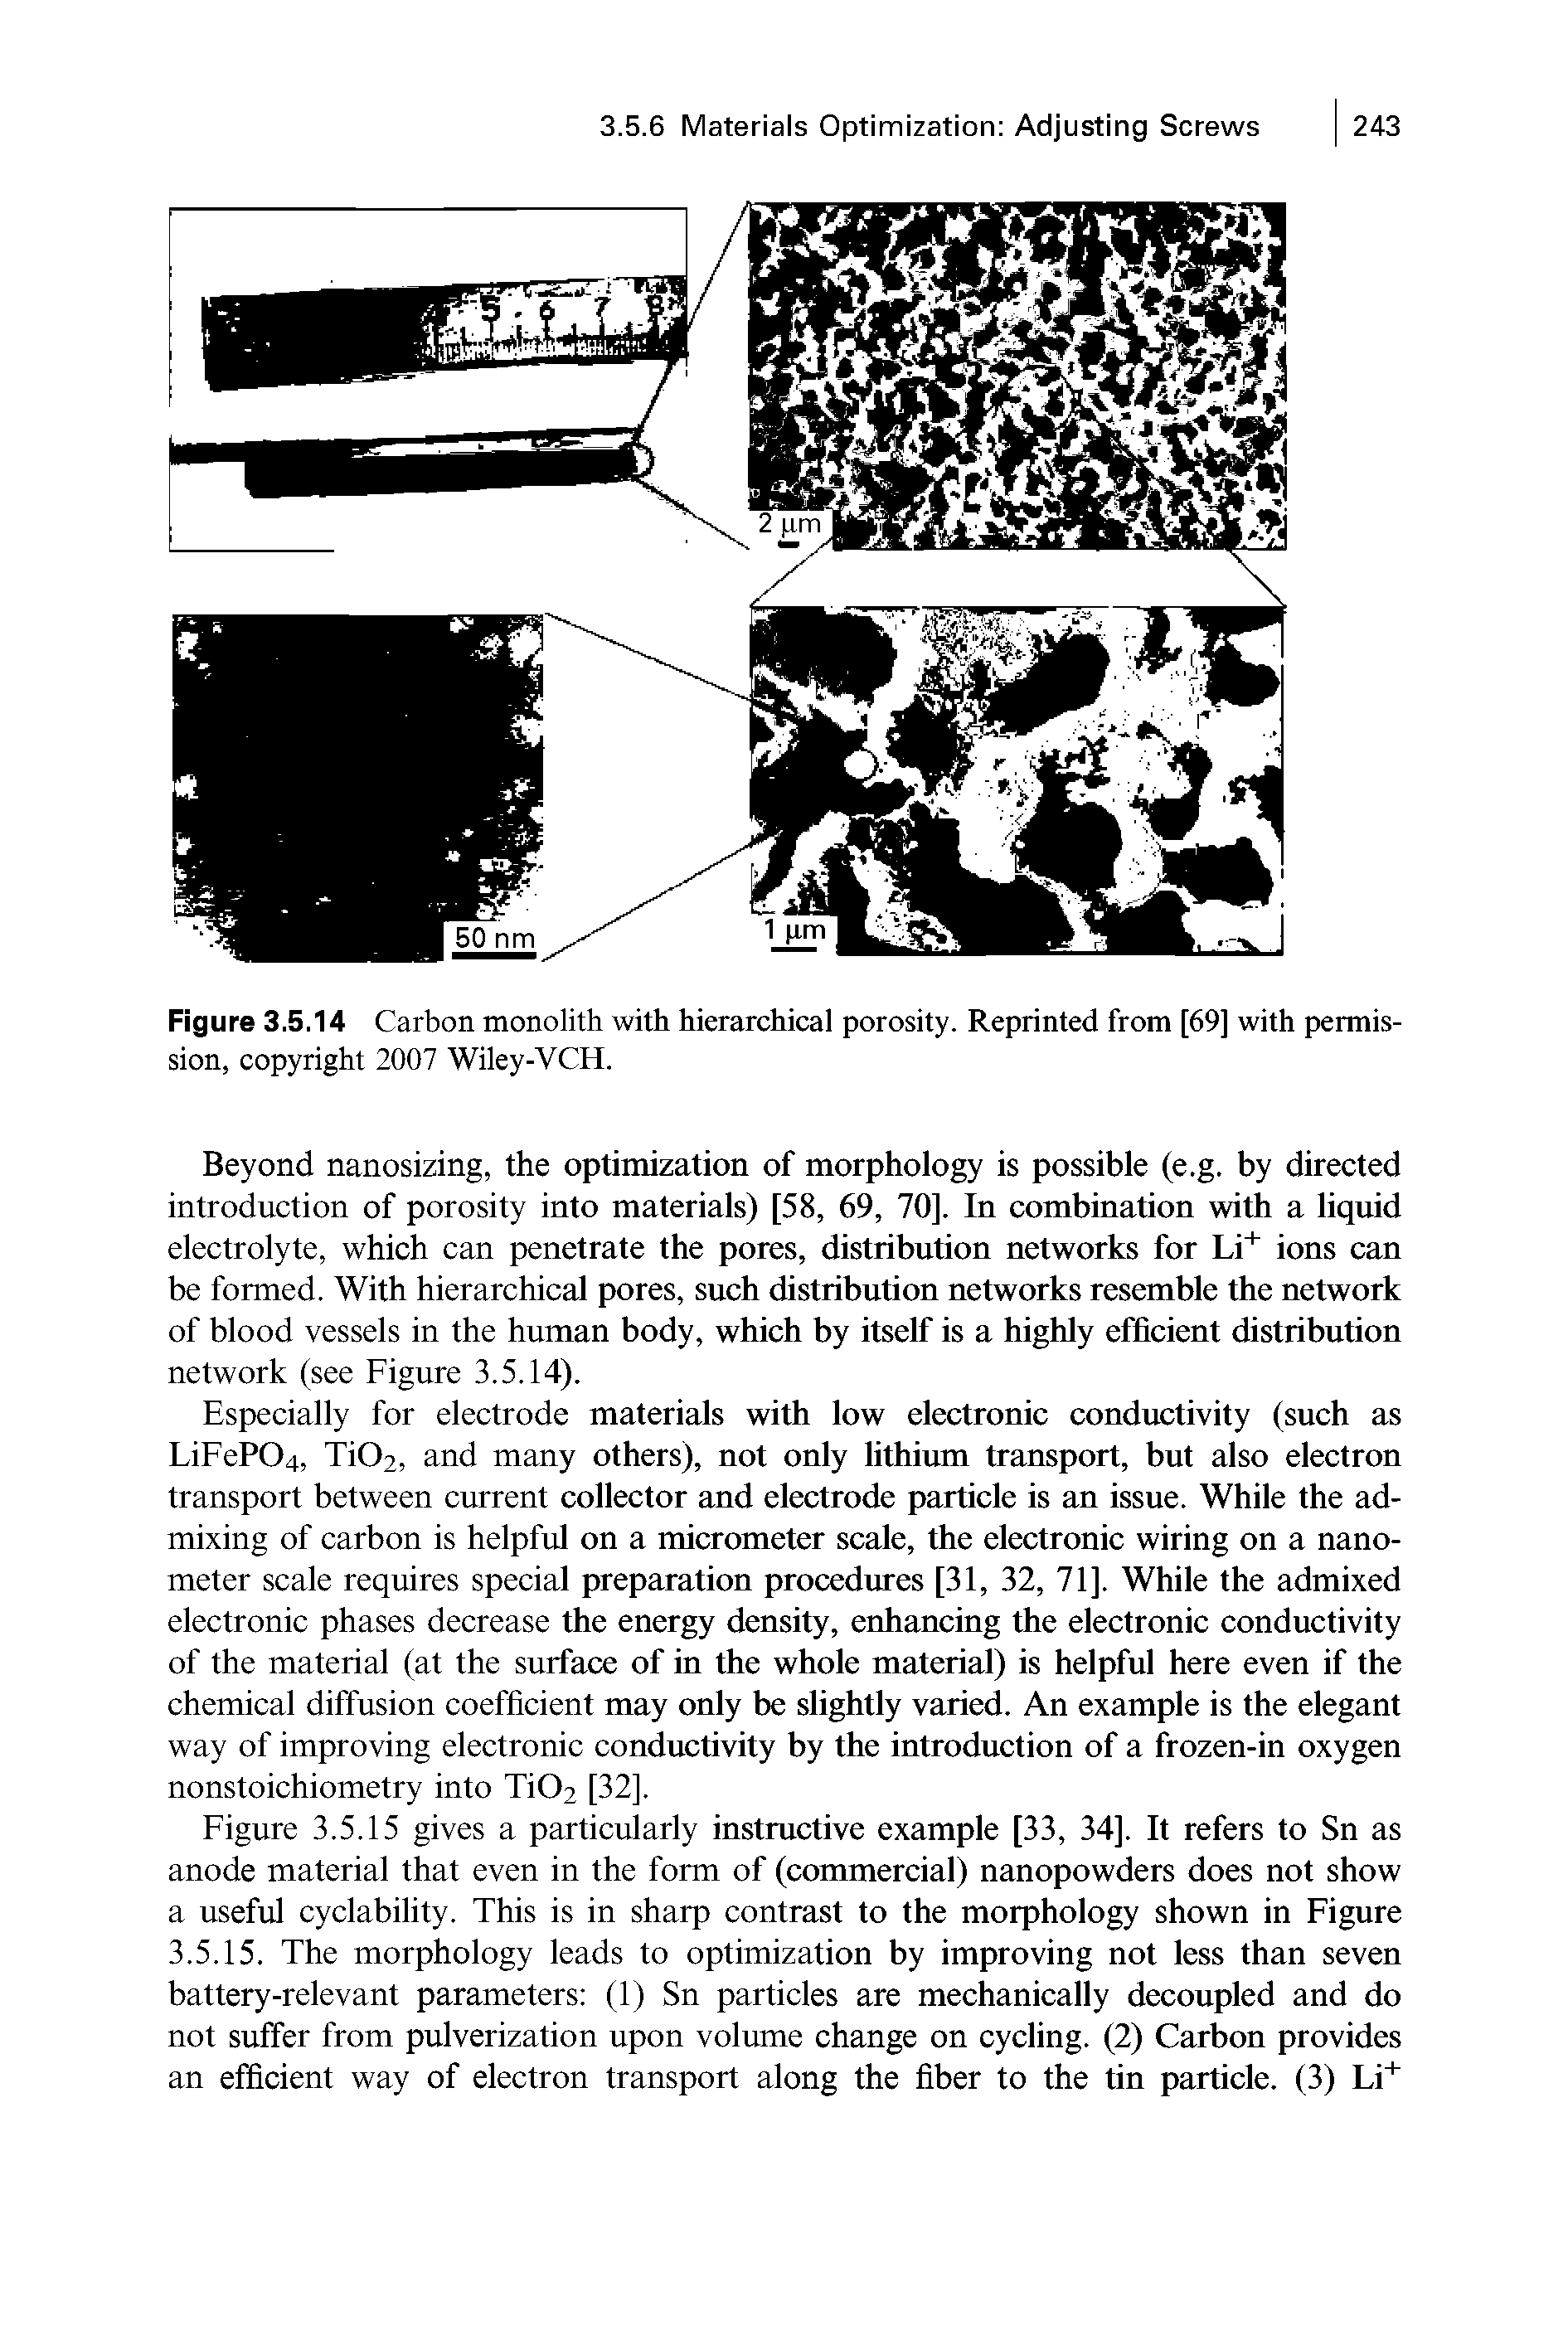 Figure 3.5.14 Carbon monolith with hierarchical porosity. Reprinted from [69] with permission, copyright 2007 Wiley-VCH.